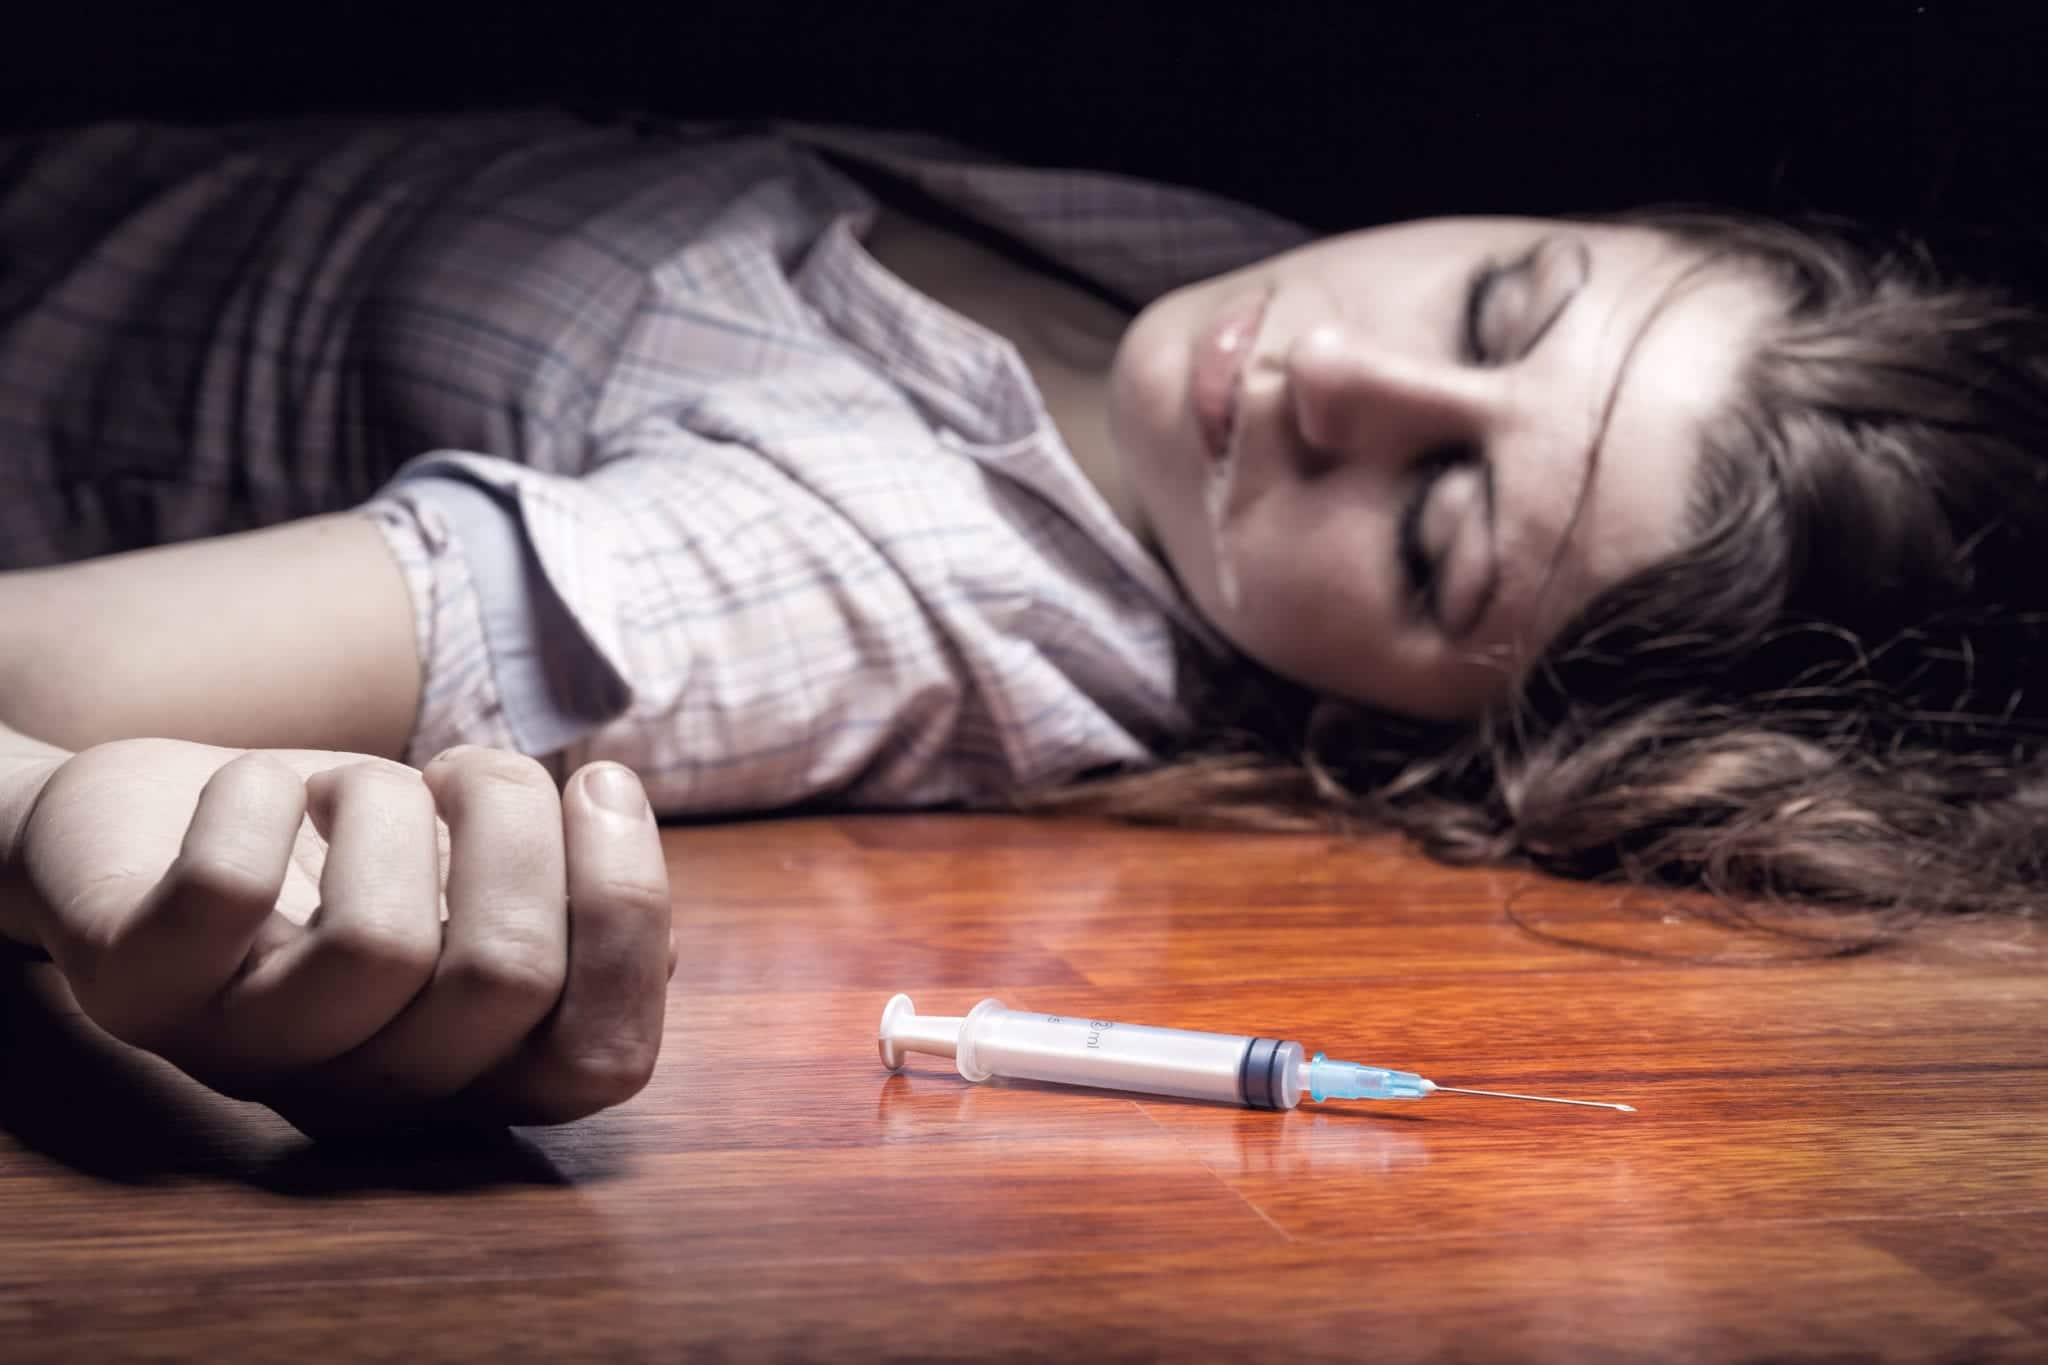 Need Help with an Overdose? Minnesota Won't Prosecute You